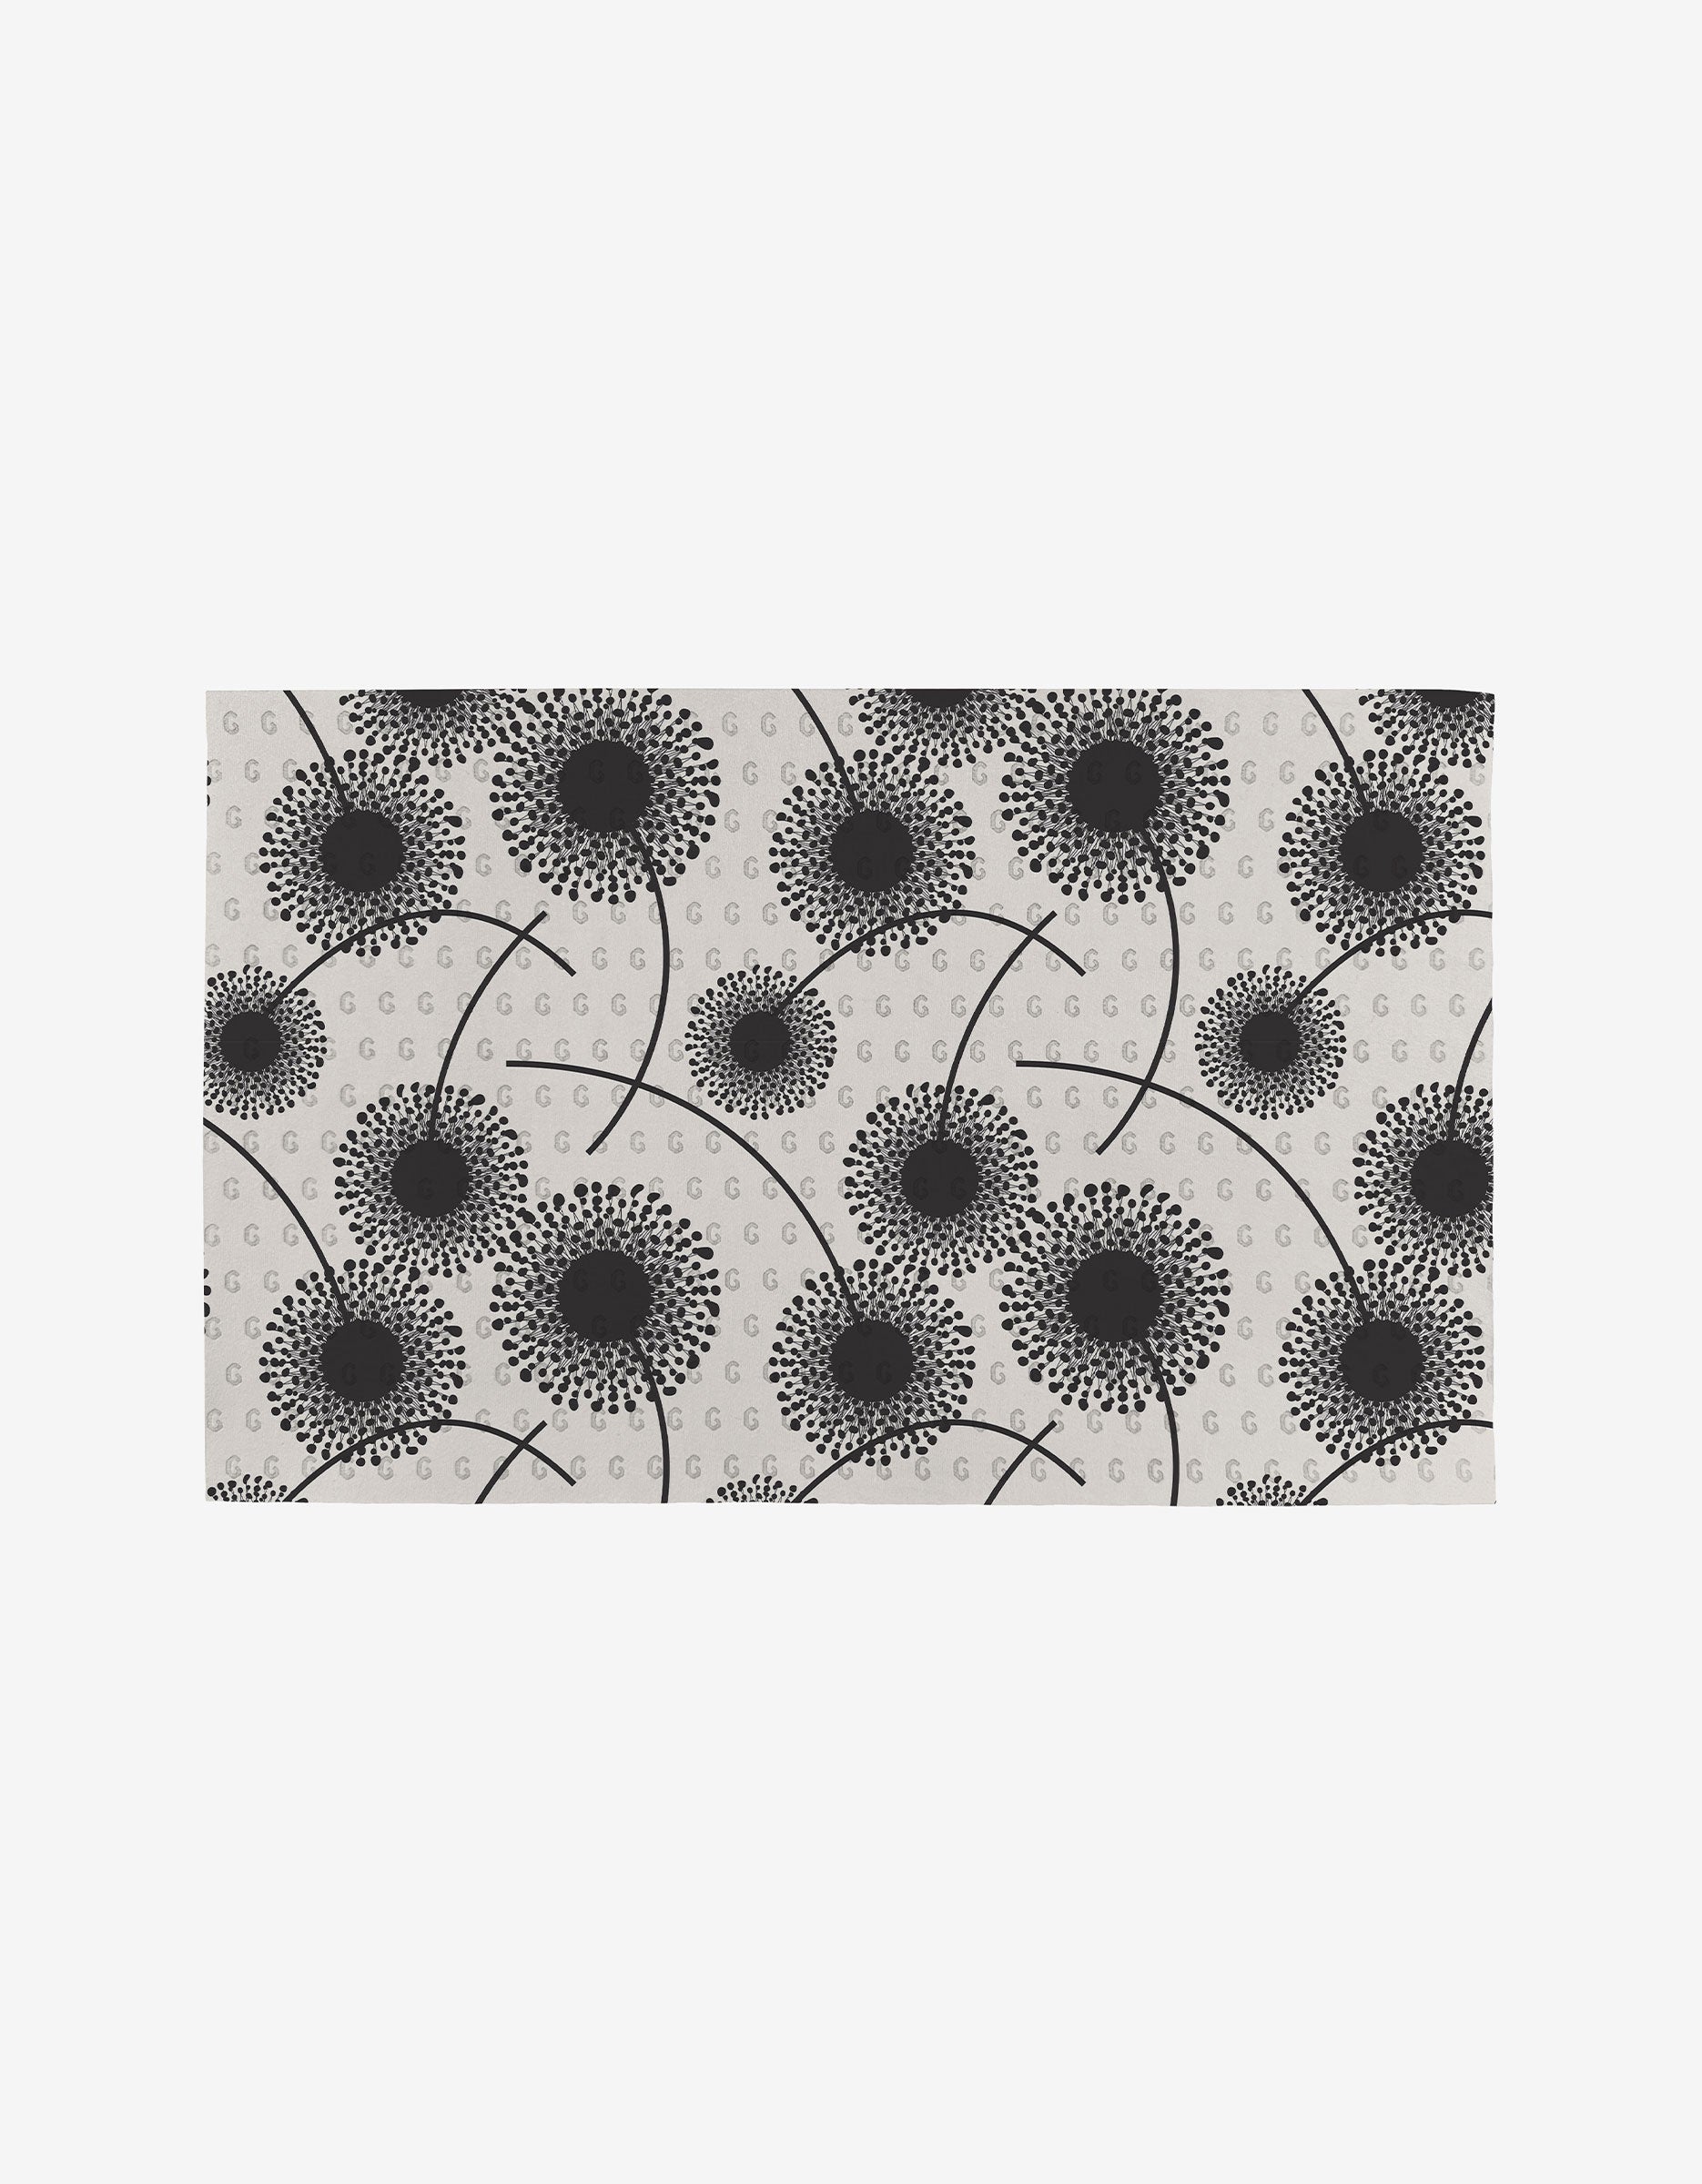 Geometry House® Not Paper Towel - Fully Bloomed